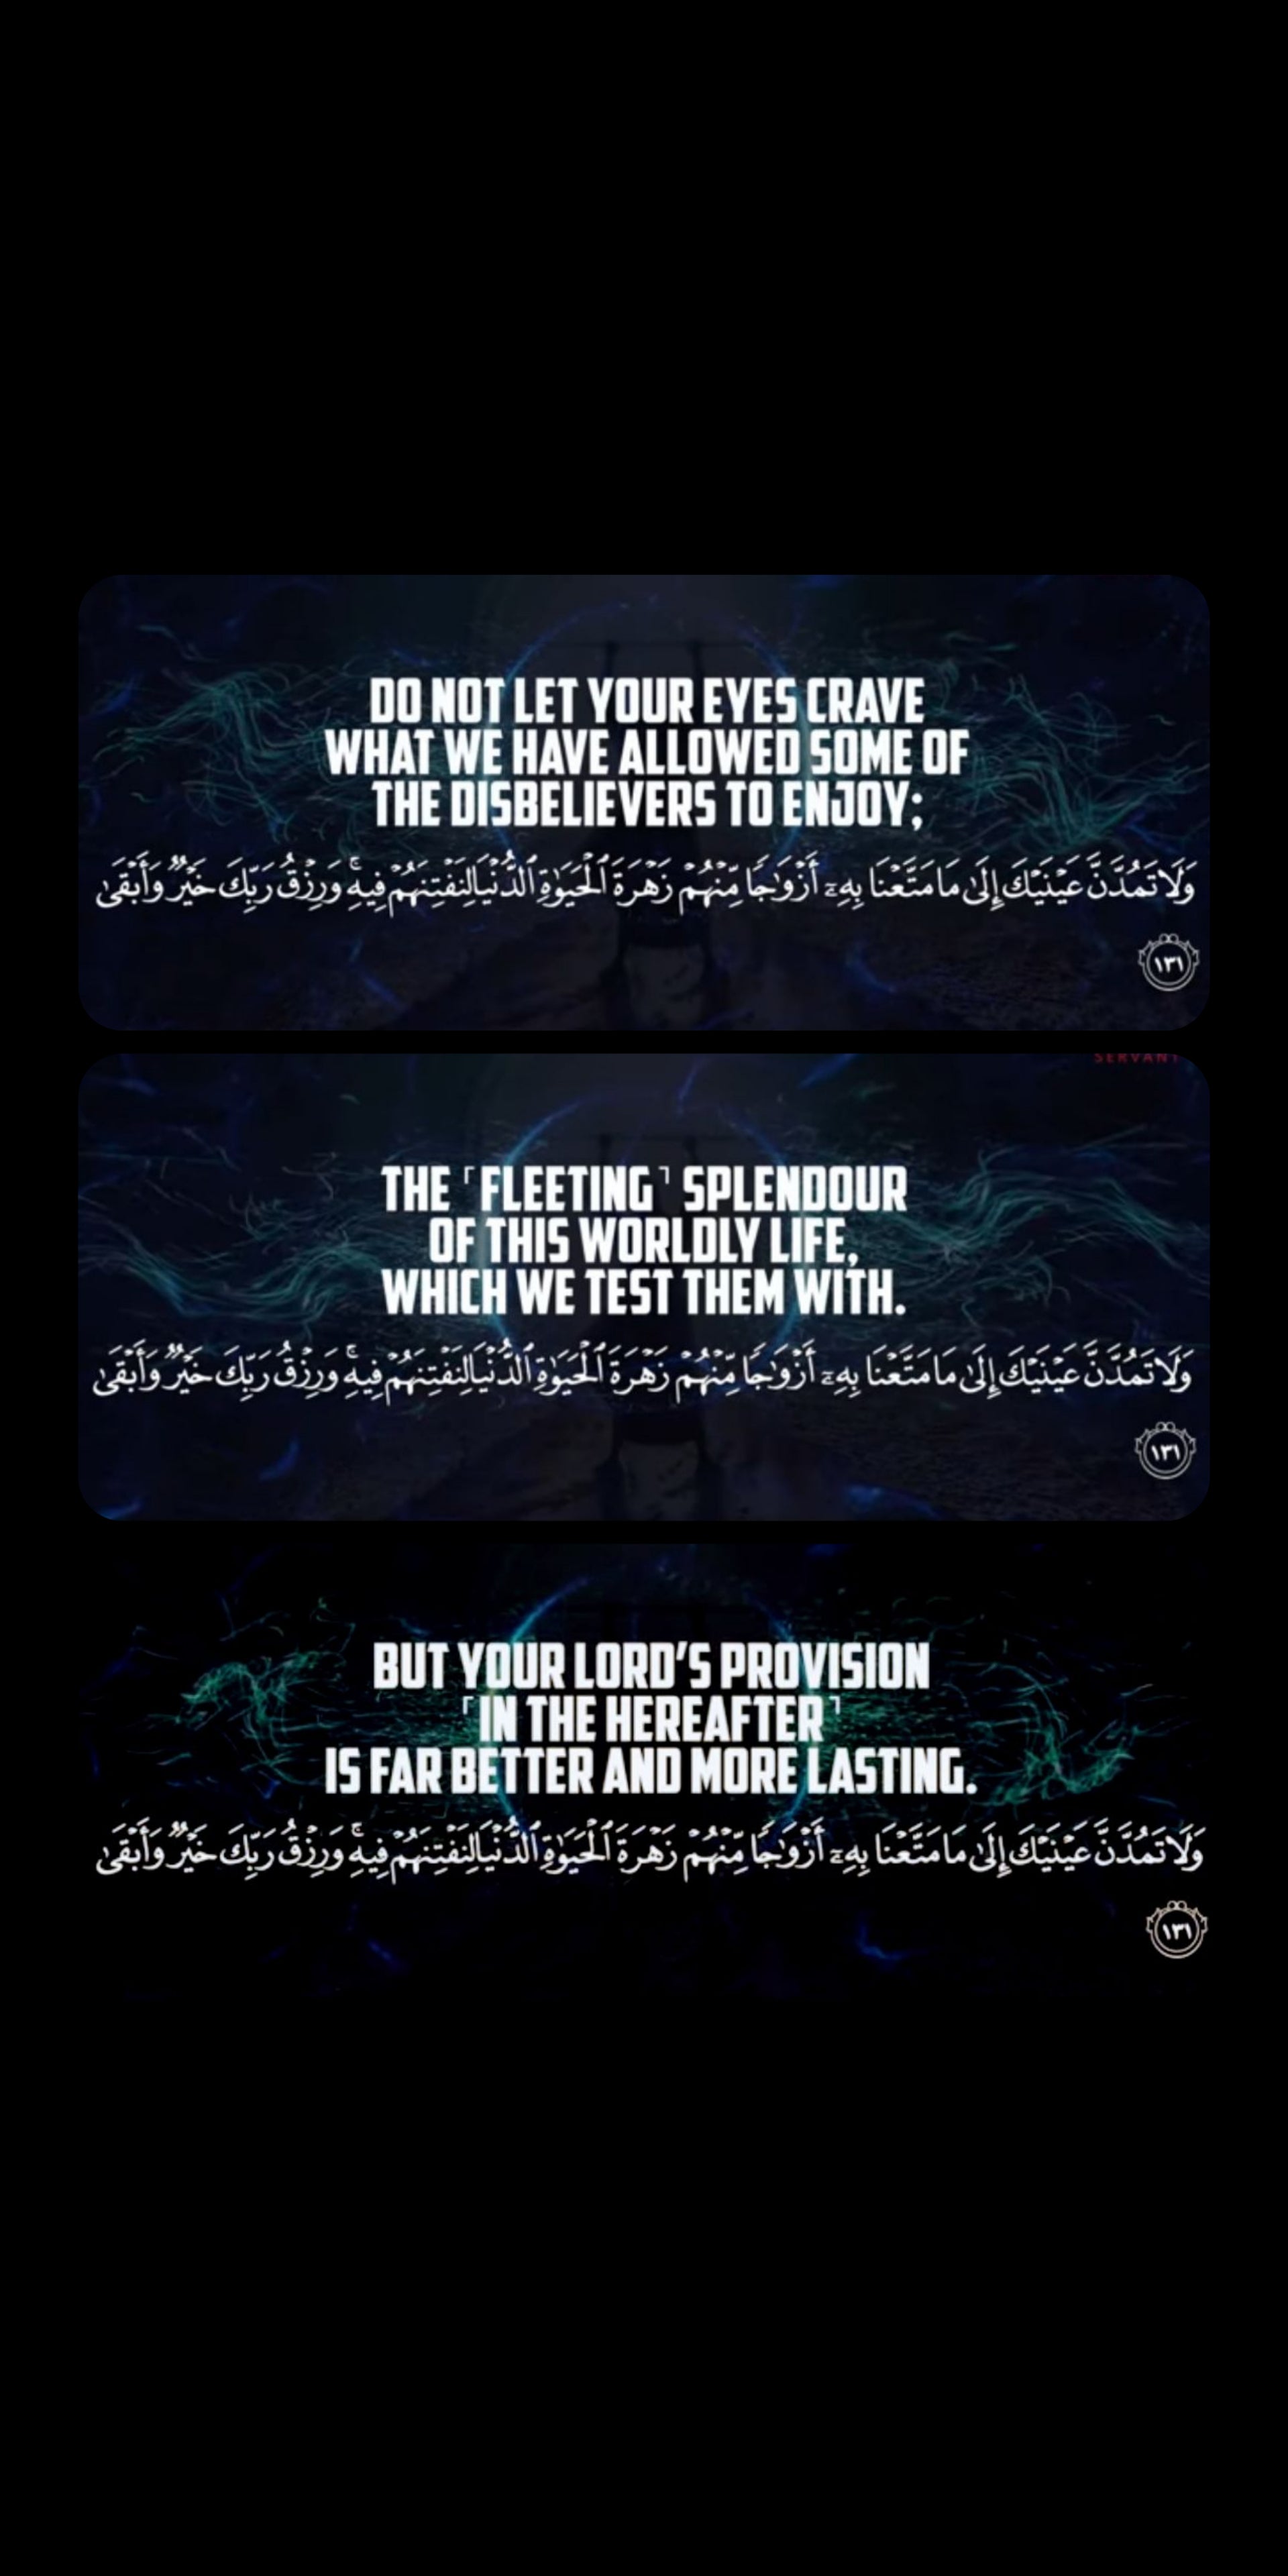 A wallpaper in black for you guys to remind you of the reality of this world form surah taha. Inshallah this will benefit those seeking motivation. Please make dua for me assalamualaikum